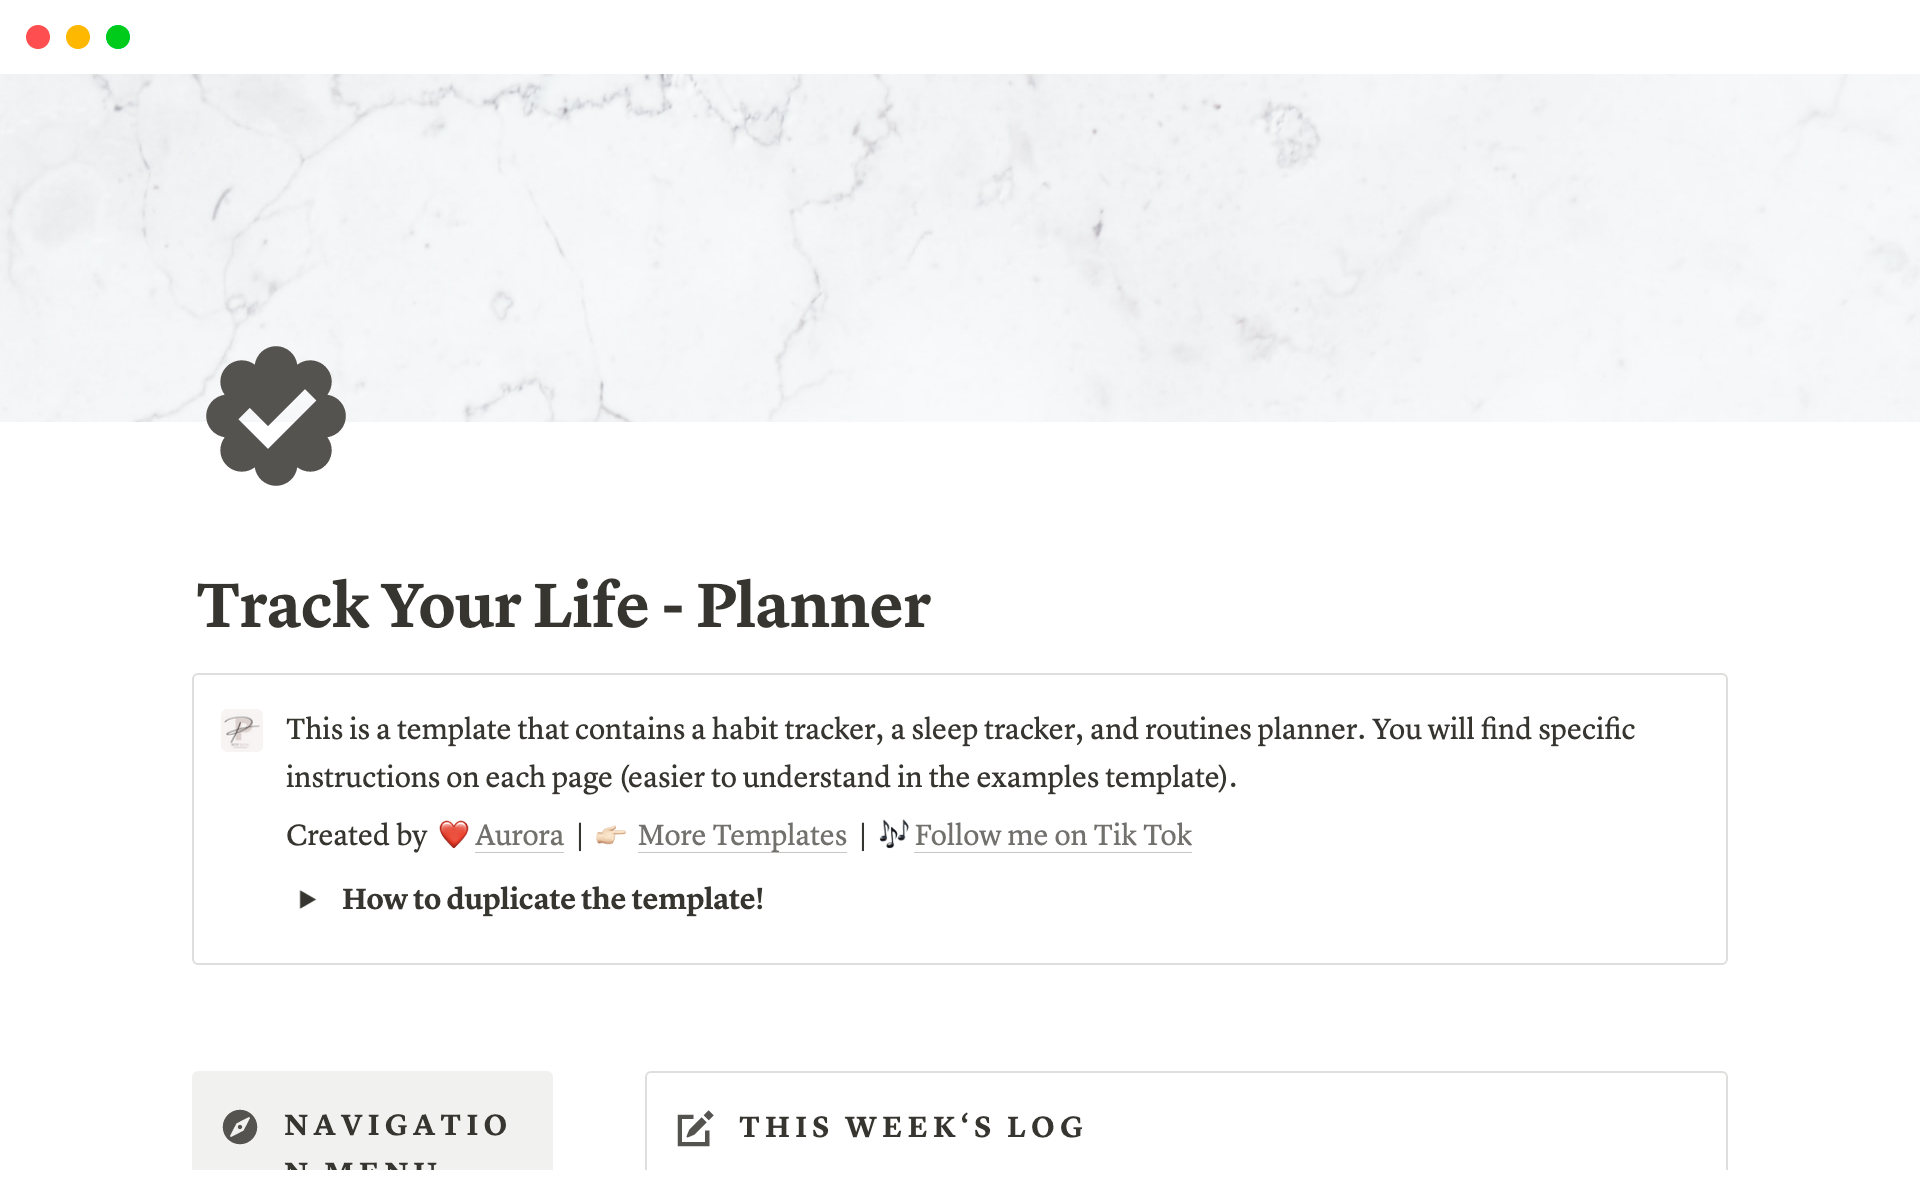 A template preview for Track Your Life - Planner